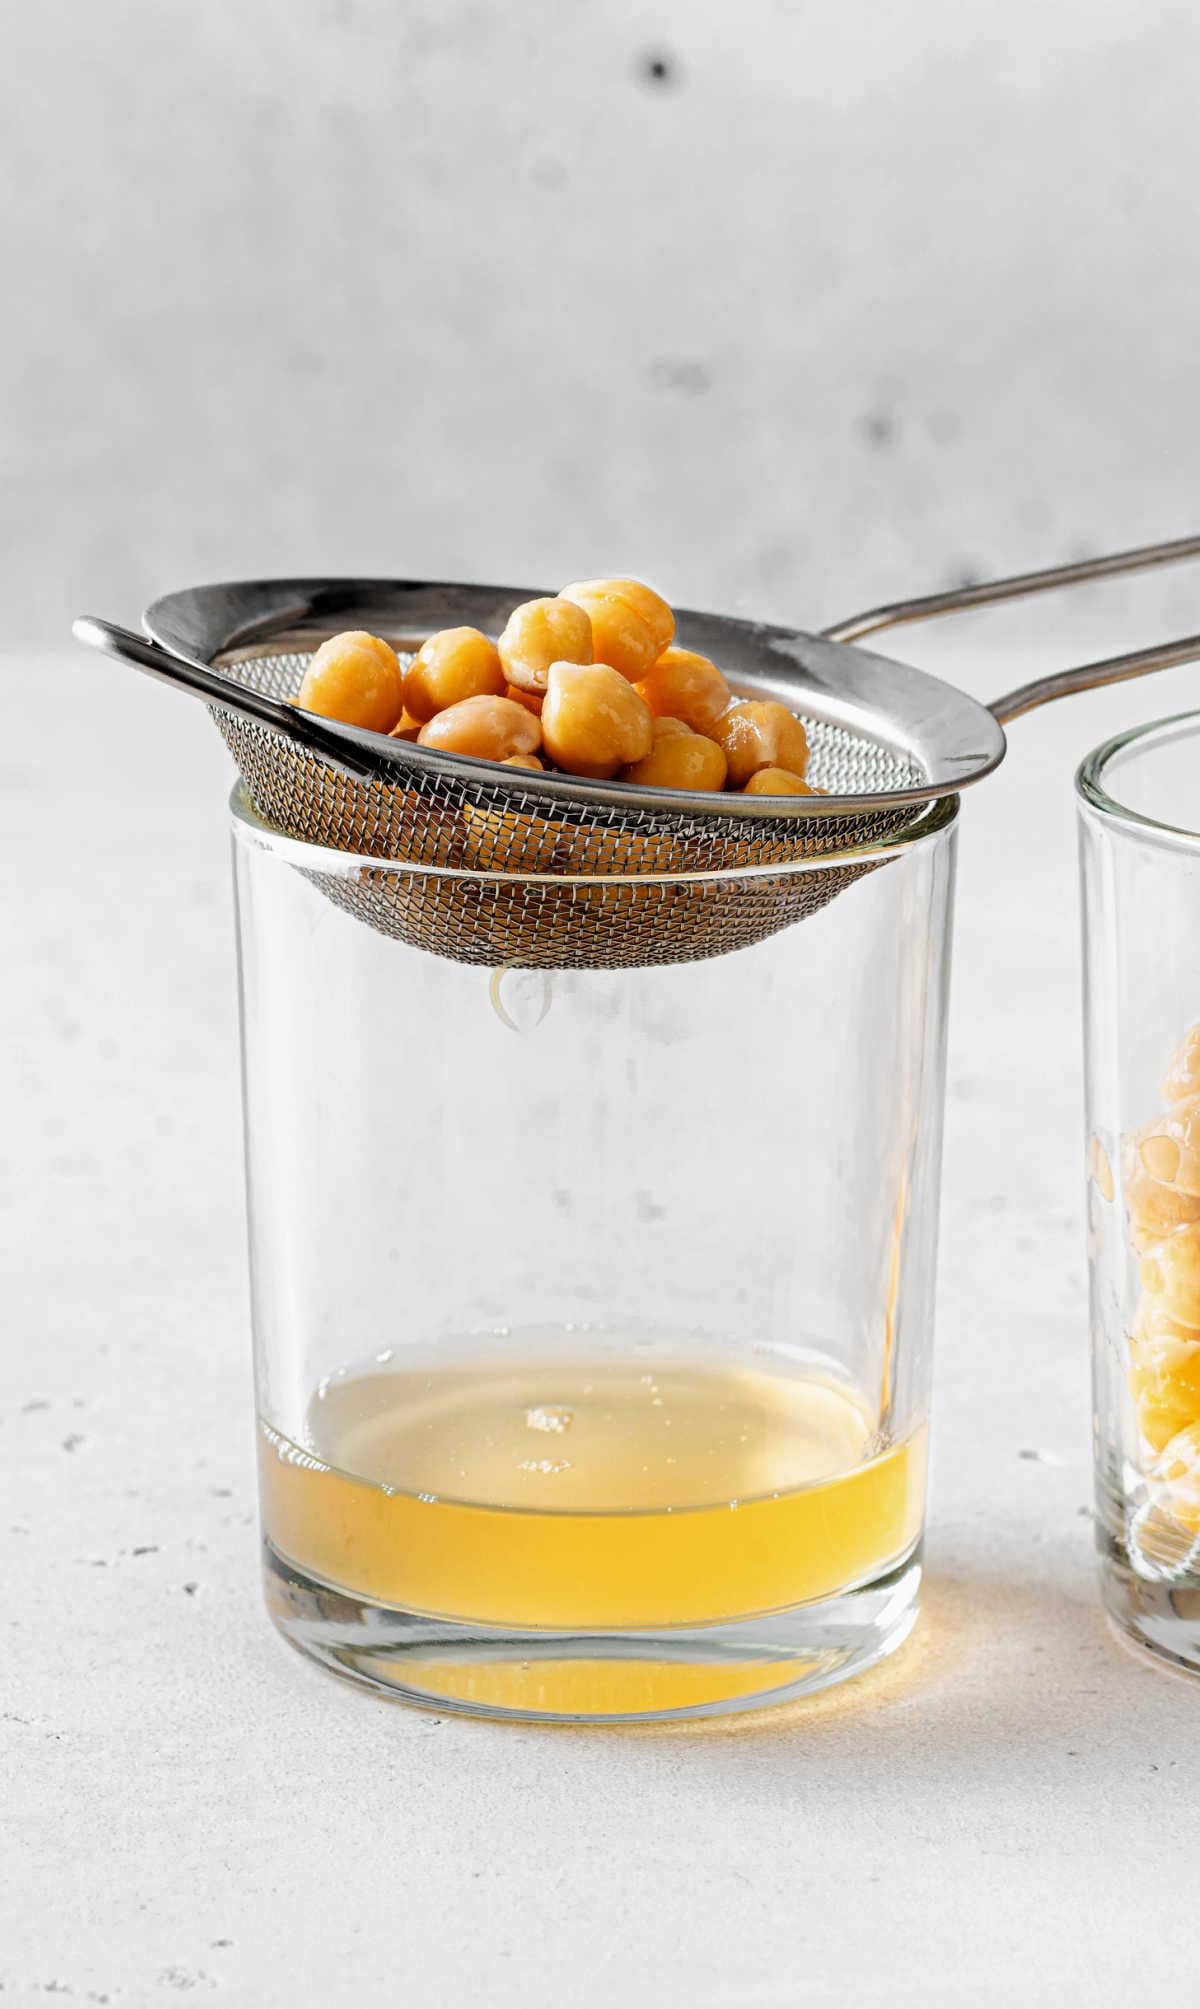 How To Make Aquafaba by straining cooked chickpeas over a glass to remove the aquafaba liquid